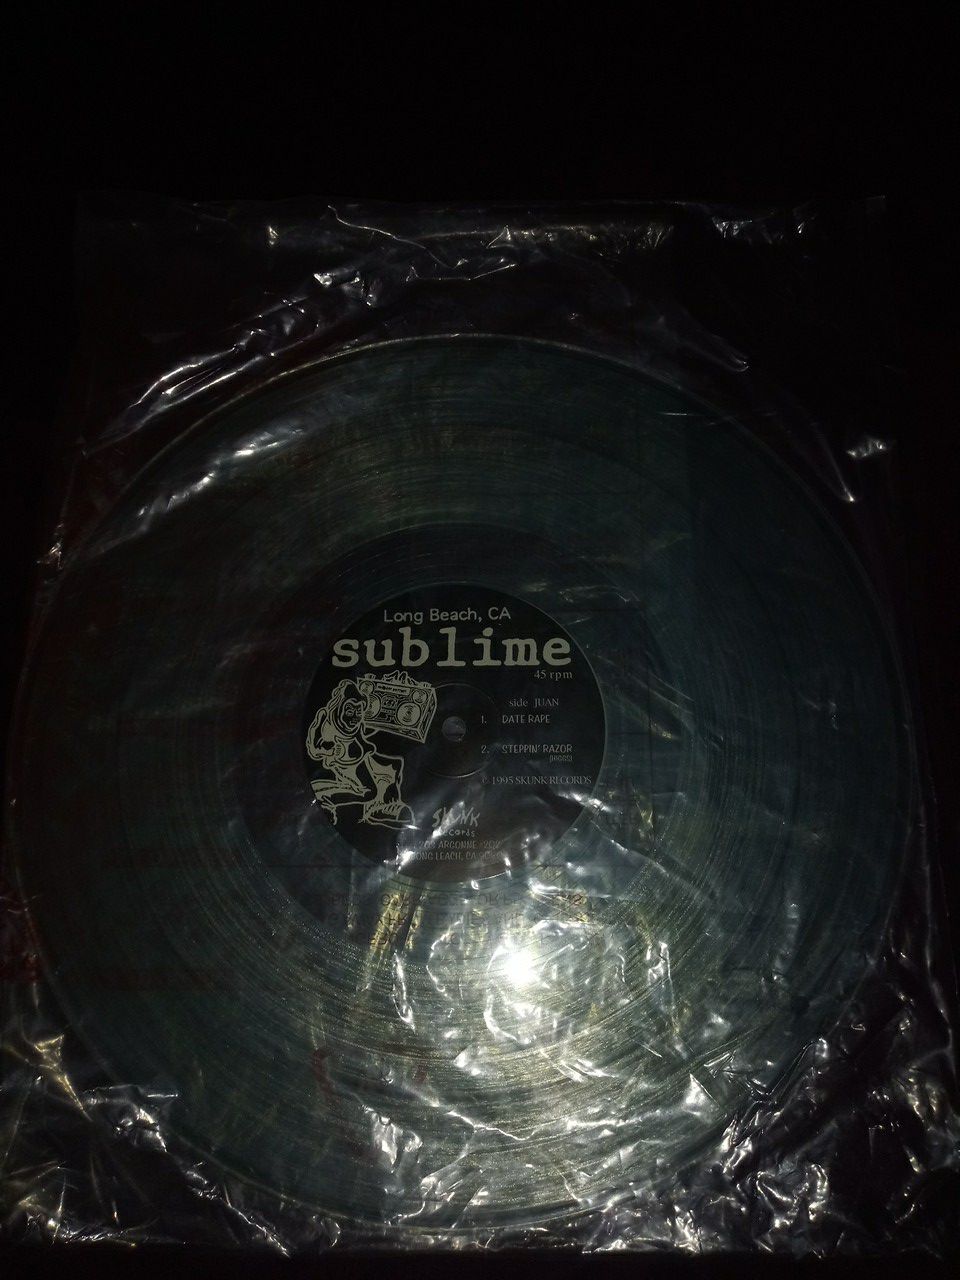 Two sided Sublime vinyl record